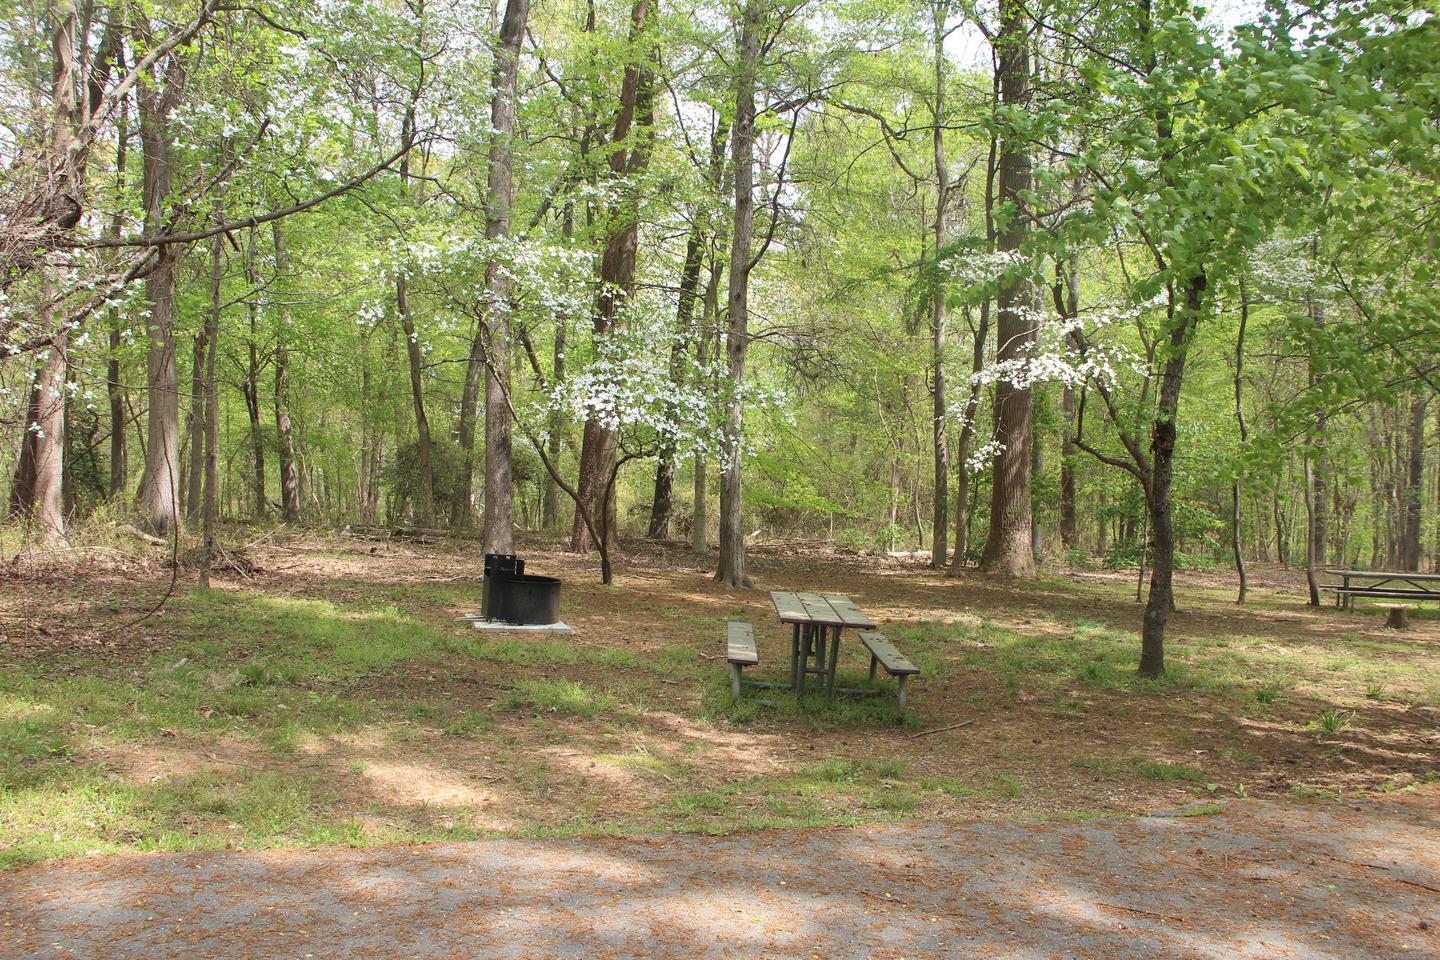 D 123  D Loop of the Greenbelt Park Md campgroundD 123  D Loop of the Greenbelt Park Maryland campground (Former Site 126)